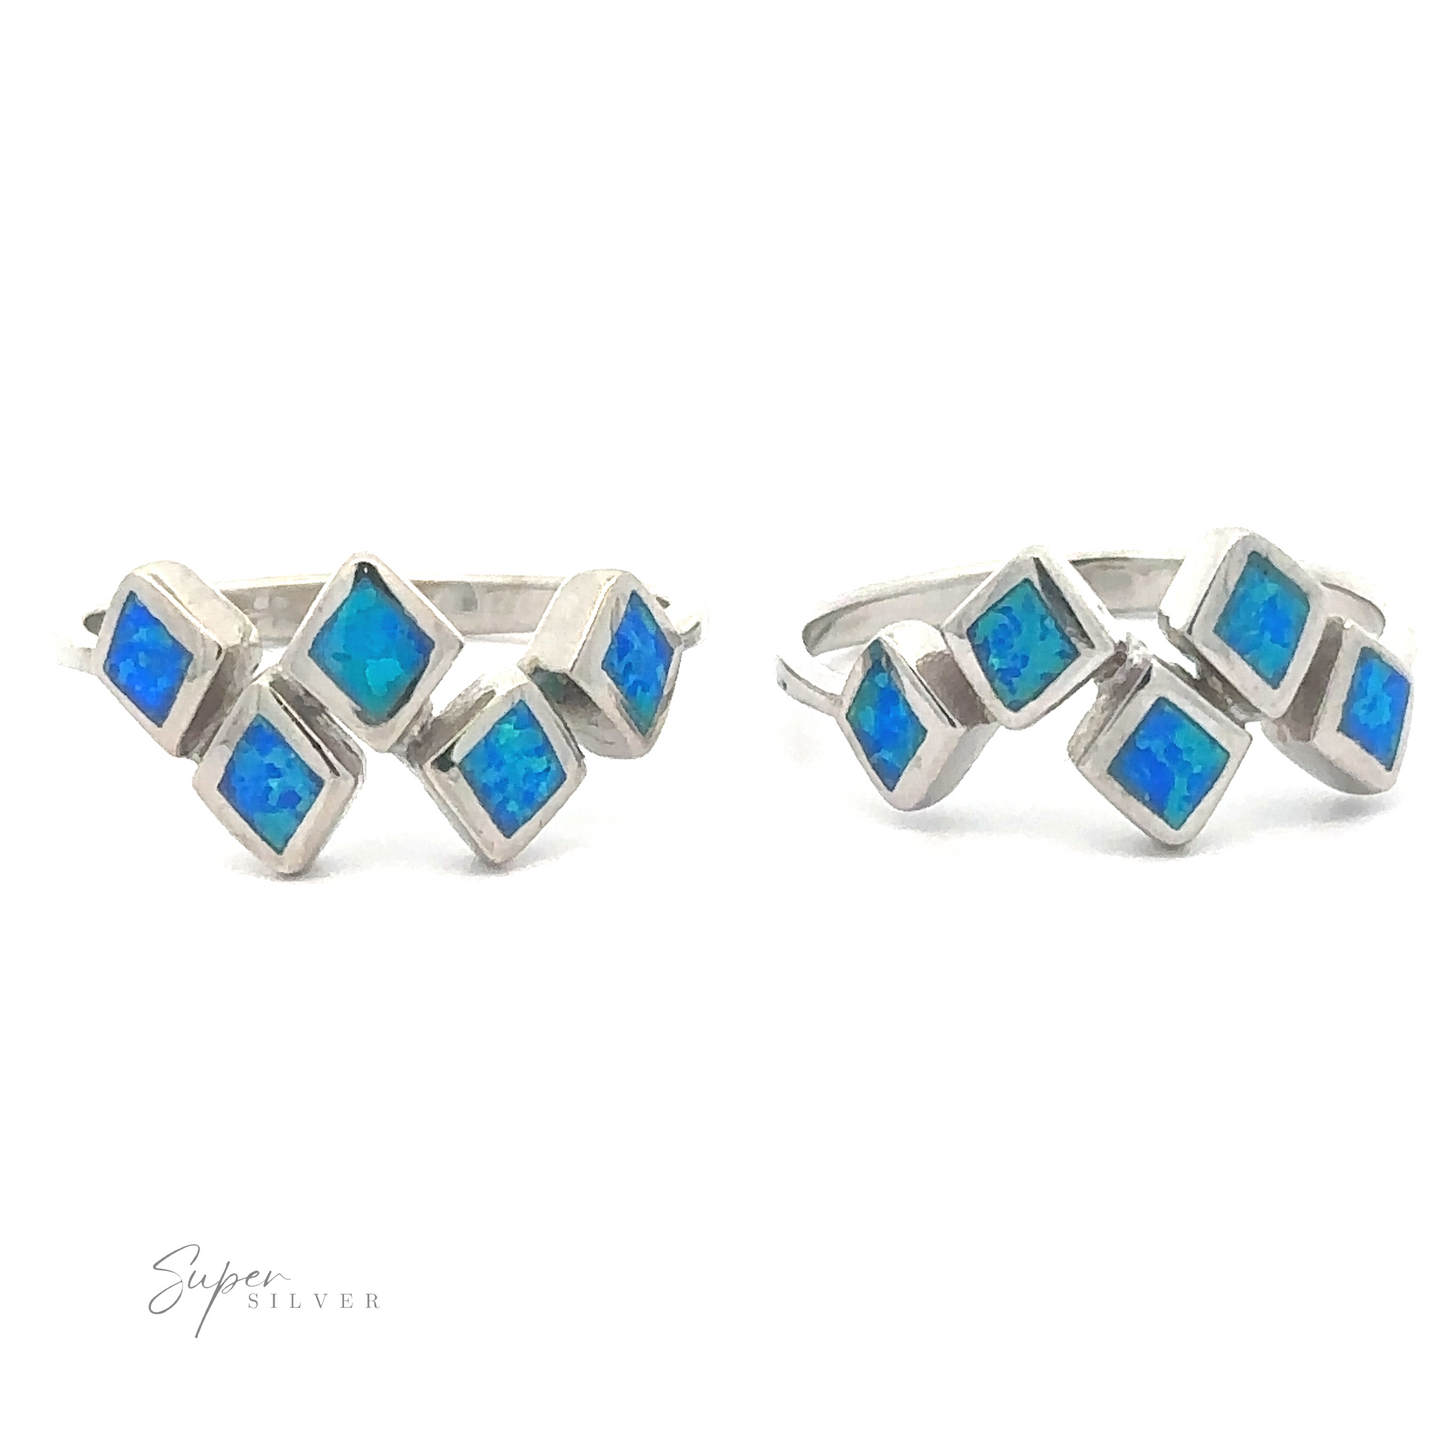 
                  
                    Two sterling silver rings with diamond pattern lab-created opal stones, displayed against a white background.
                  
                